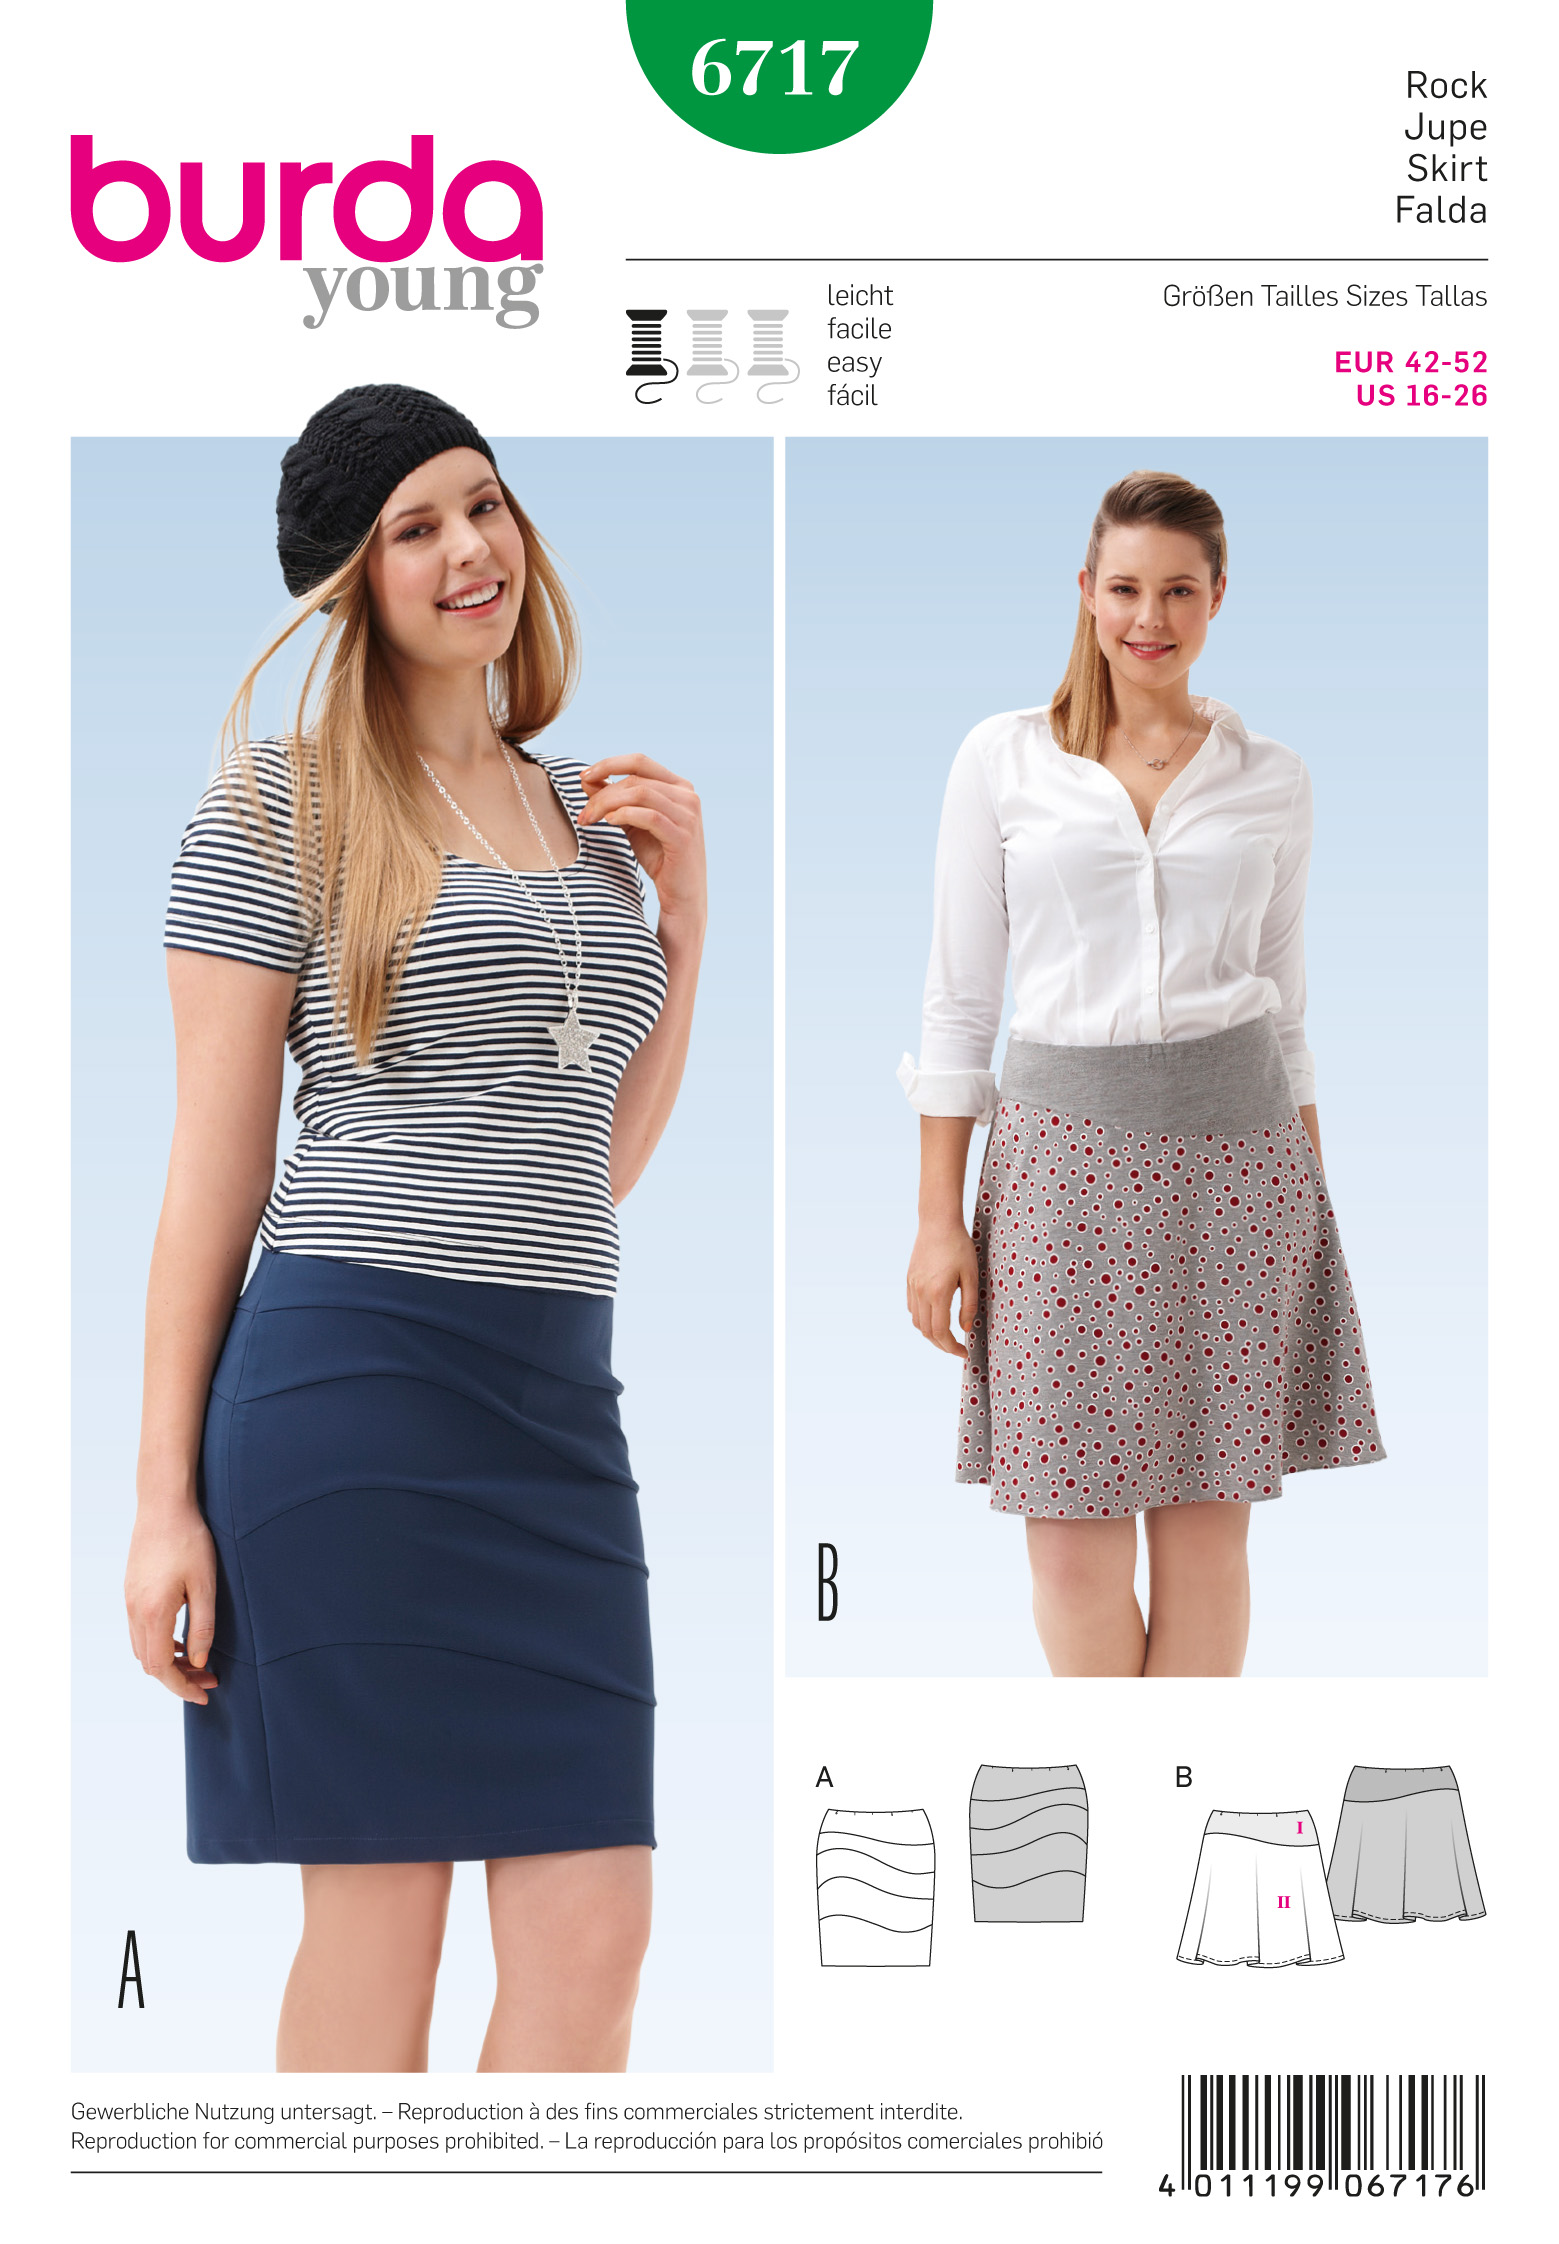 Close Fitting Skirt Misses' Sizes 18-28 Factory Folded Burda 3805  Plus Size Loose Fitting Top or Jacket